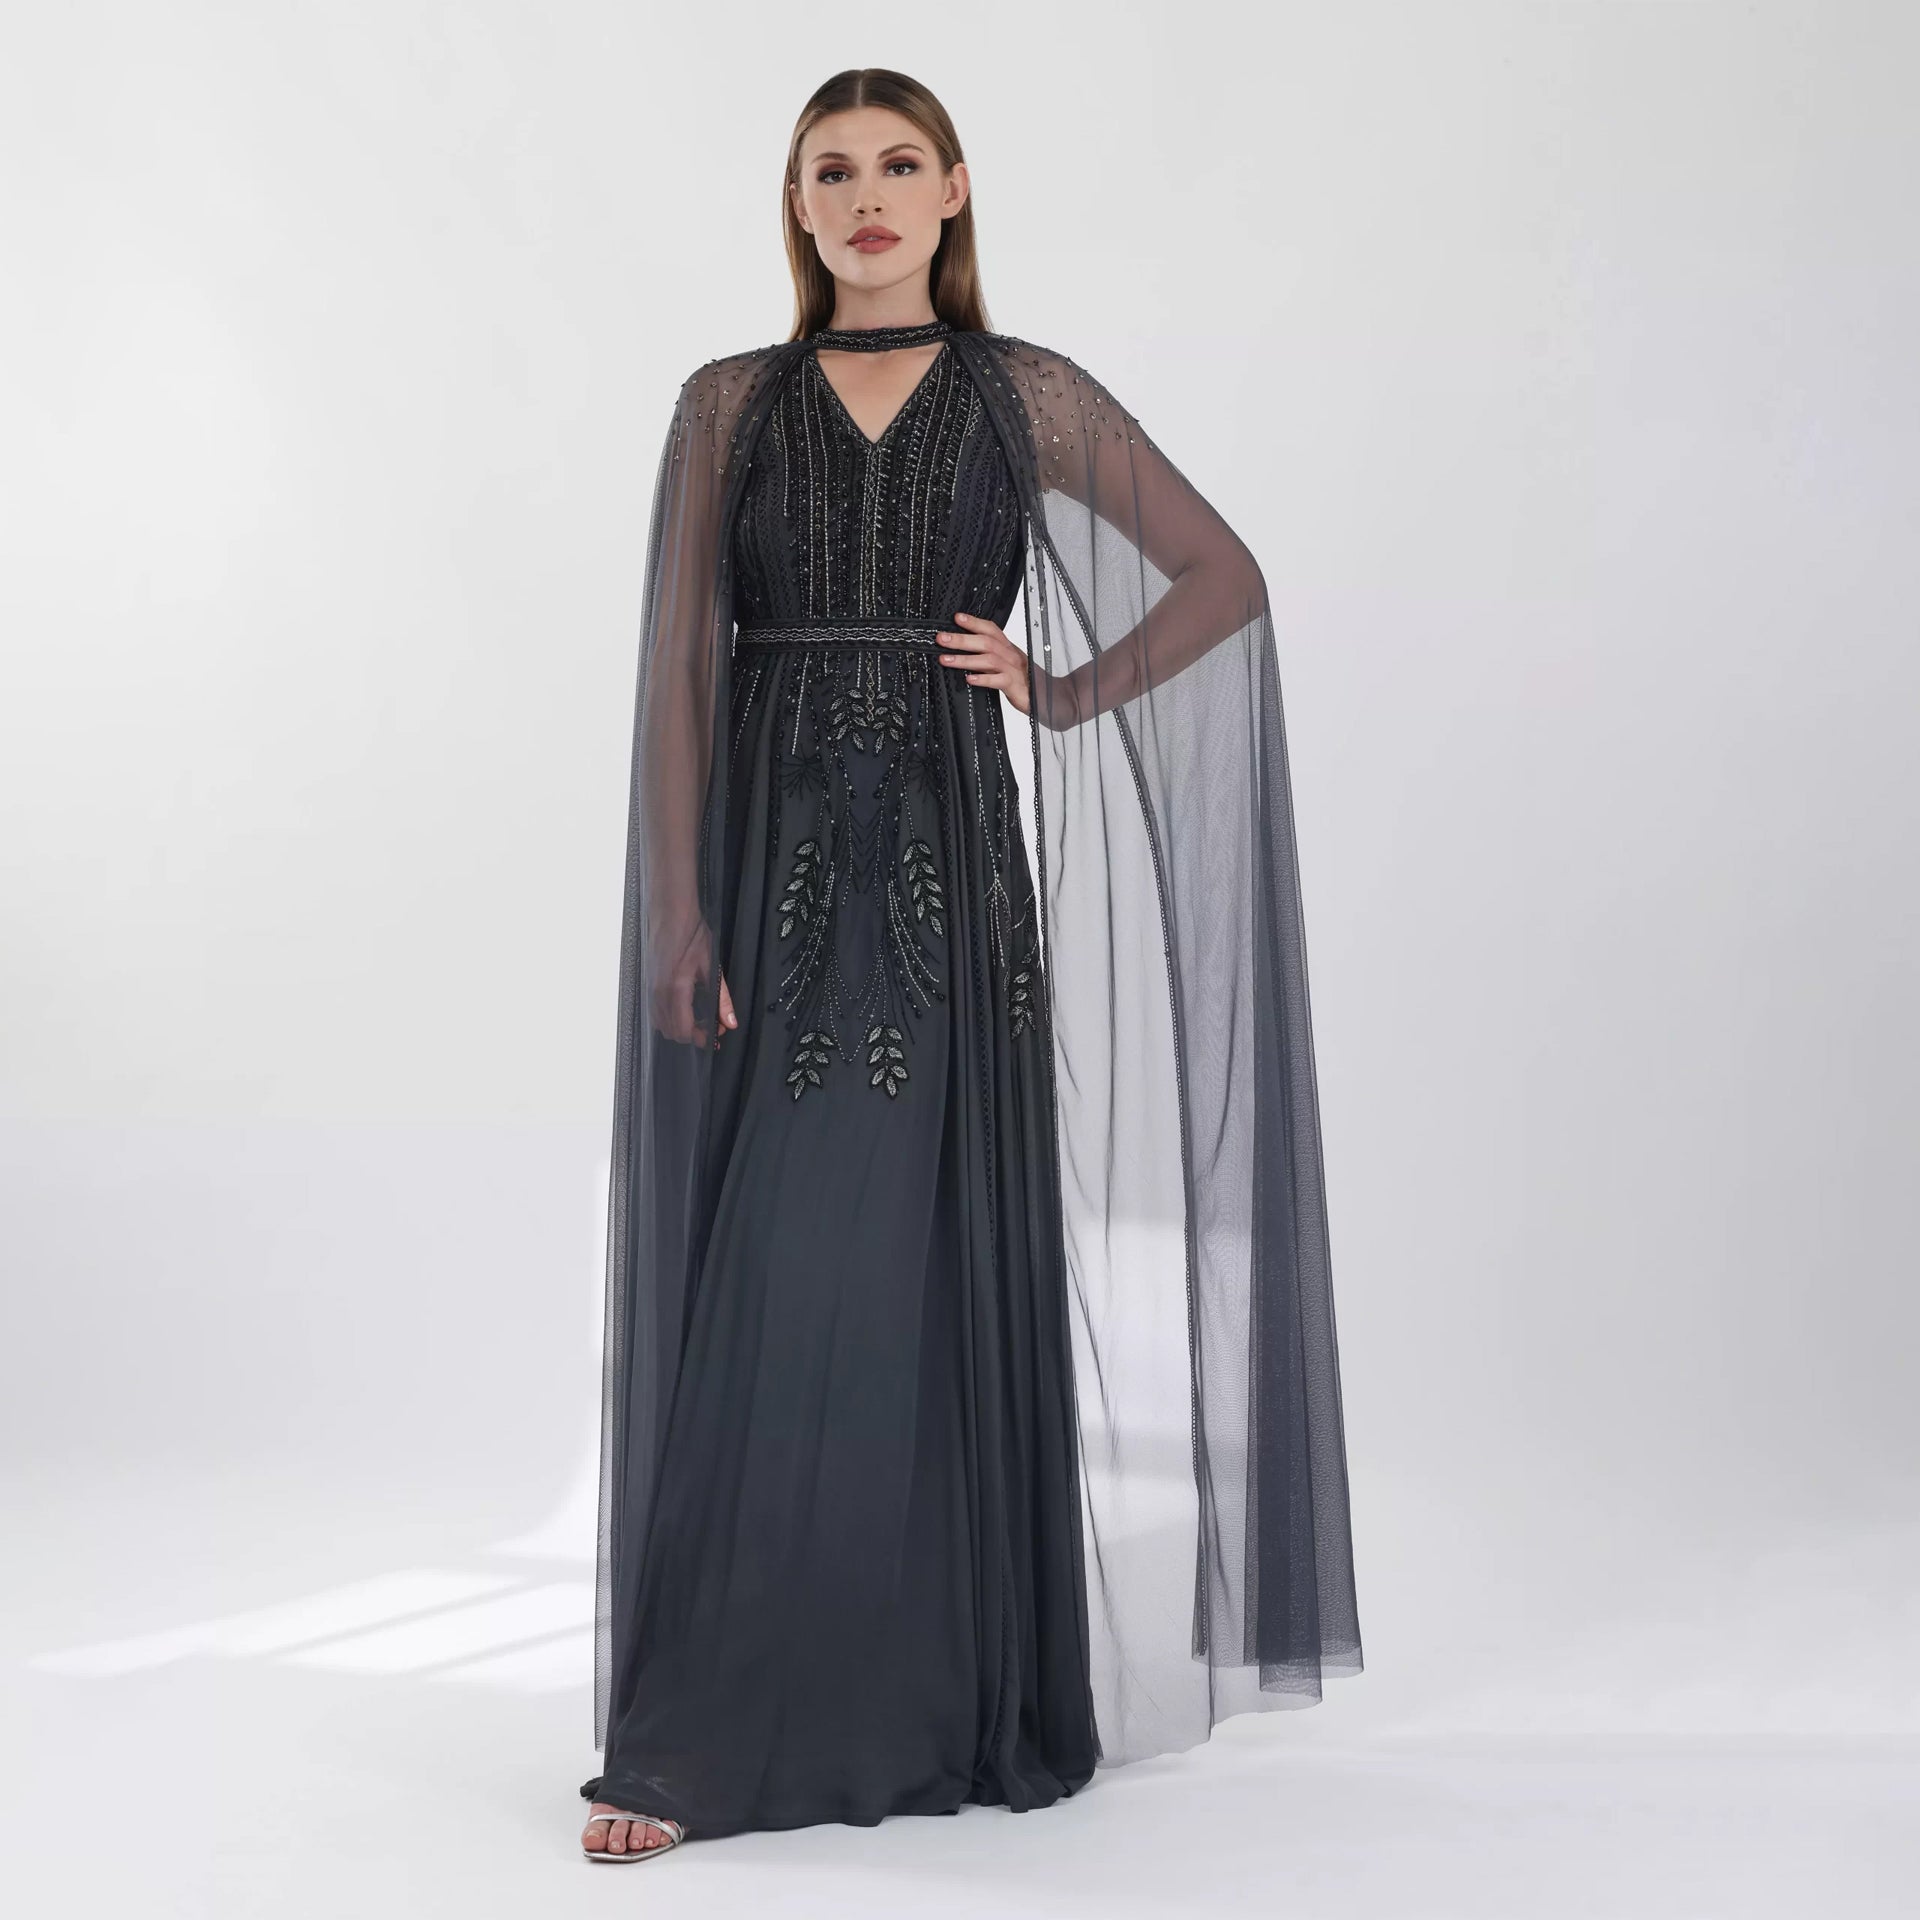 Dark Gray Sleeveless Dress with Silver Embroidery and Cape From Shalky